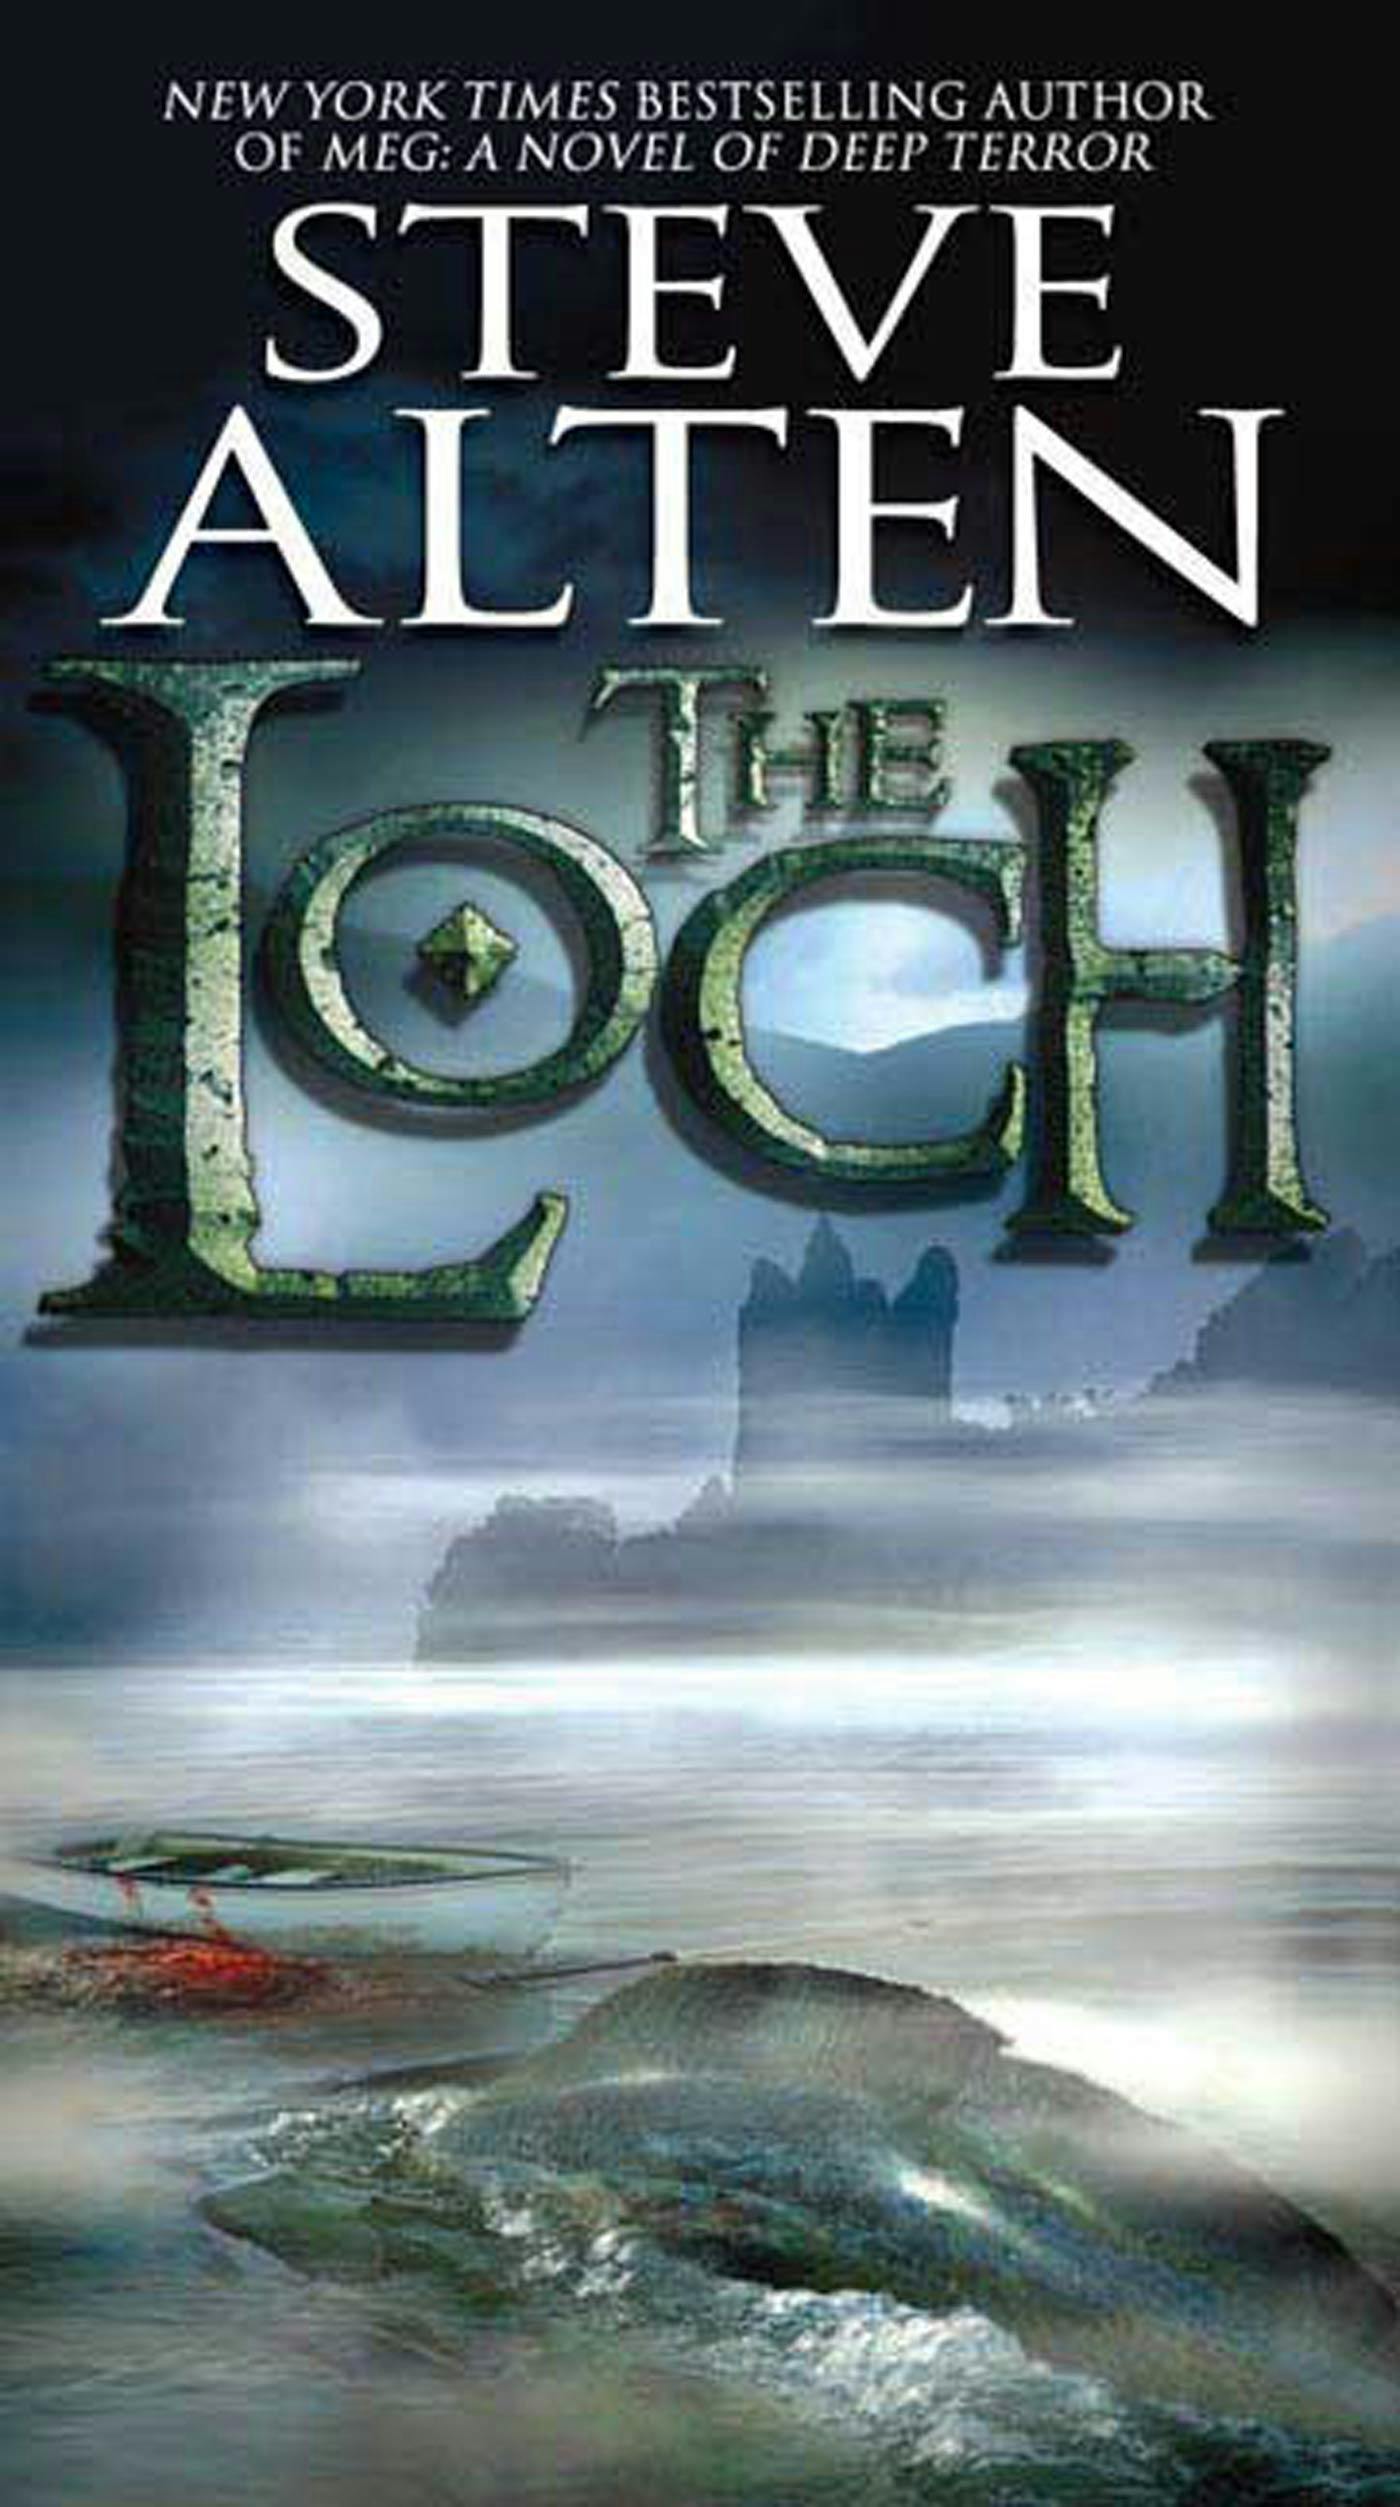 Cover for the book titled as: The Loch